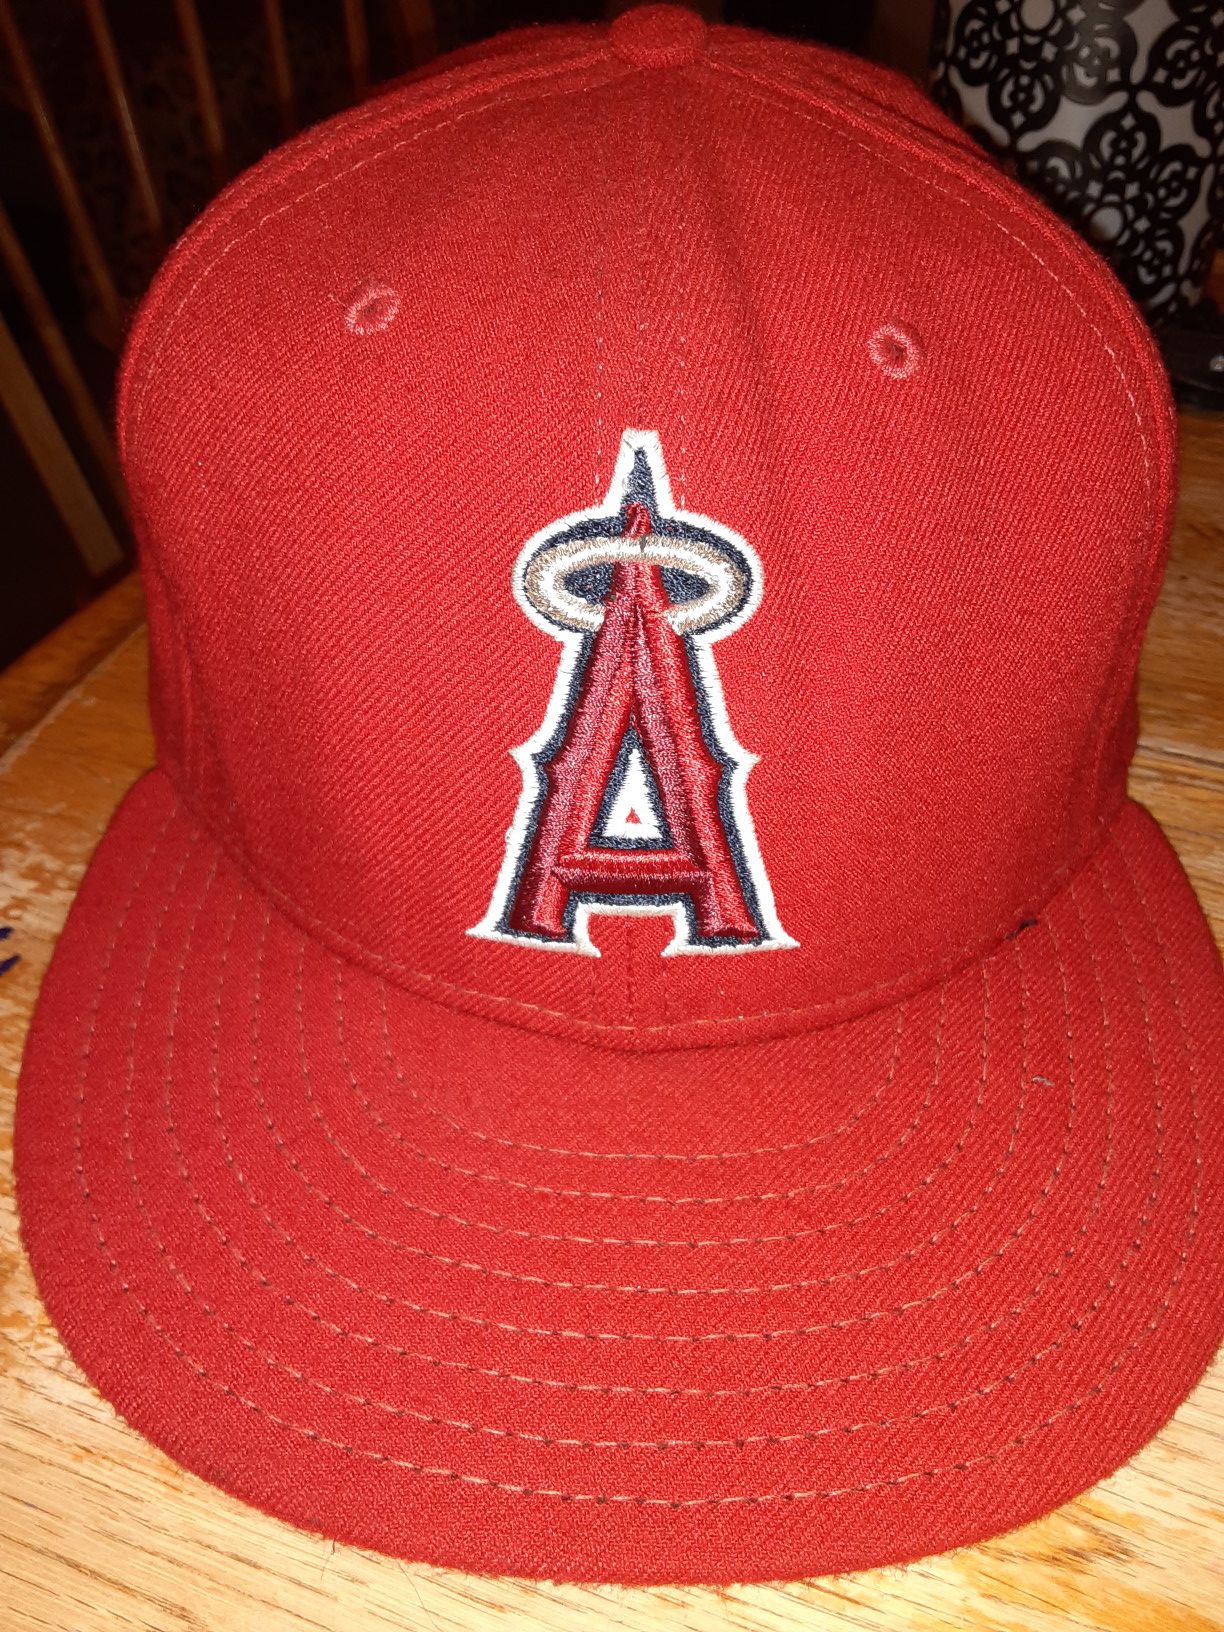 Los Angeles Angels New Era fitted hat size 7 and 5/8